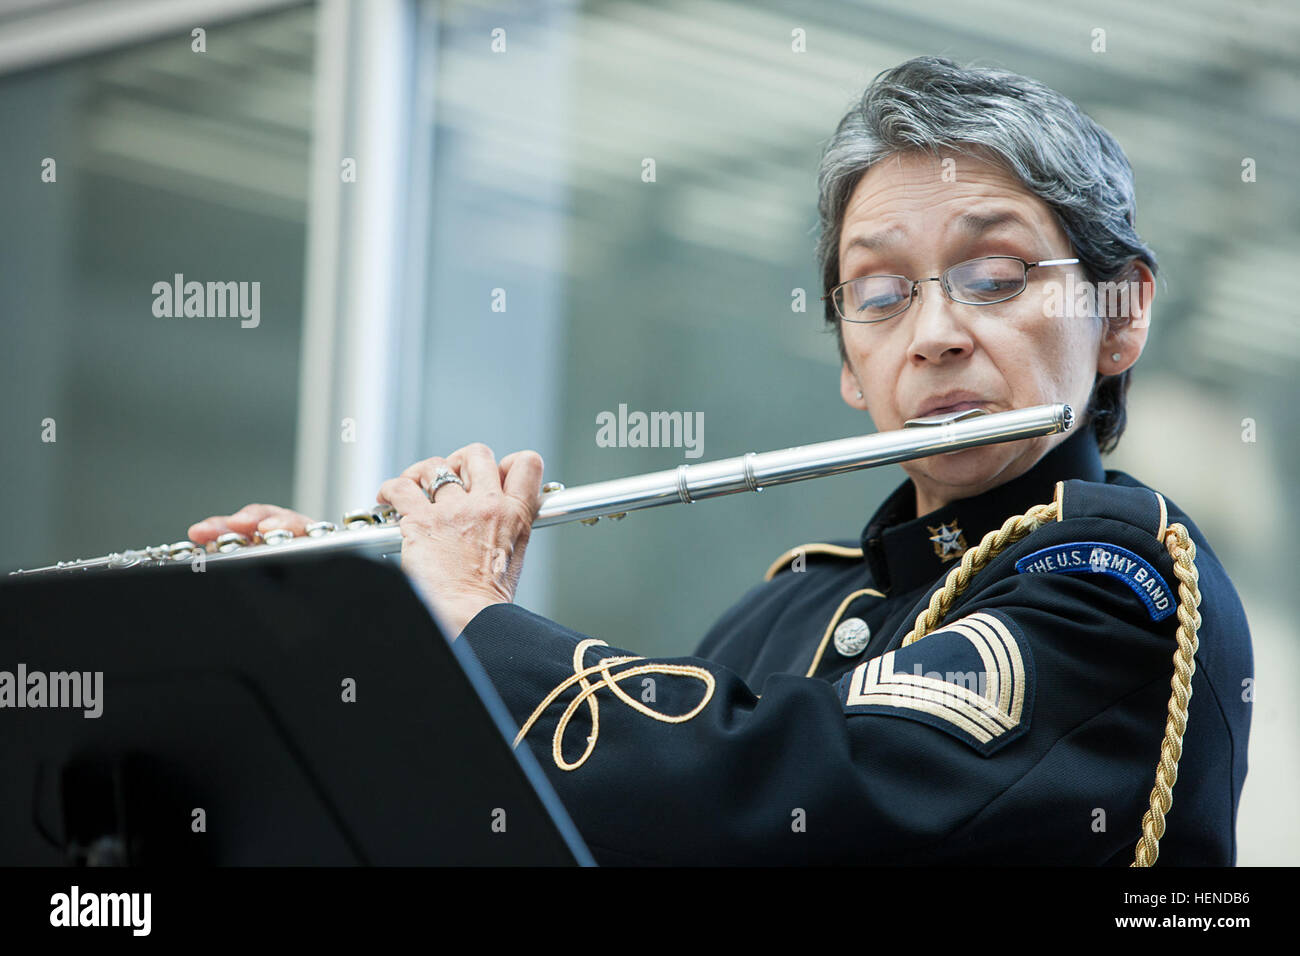 Master Sgt. Marie Luisa de la Cerda Rohde plays, 'SYRINX for unaccompanied flute,' by Claude Debussy during a chamber music concert with other female members of The United States Army Band 'Pershing's Own,' in honor of Women's History Month at The Women in Military Service for America Memorial in Arlington, Va. March 22, 2014. The concert featured female members of 'Pershing's Own.' (Joint Base Myer-Henderson Hall PAO photo by Rachel Larue) Women musicians perform in honor of Women%%%%%%%%E2%%%%%%%%80%%%%%%%%99s History Month 140320-A-DQ287-708 Stock Photo